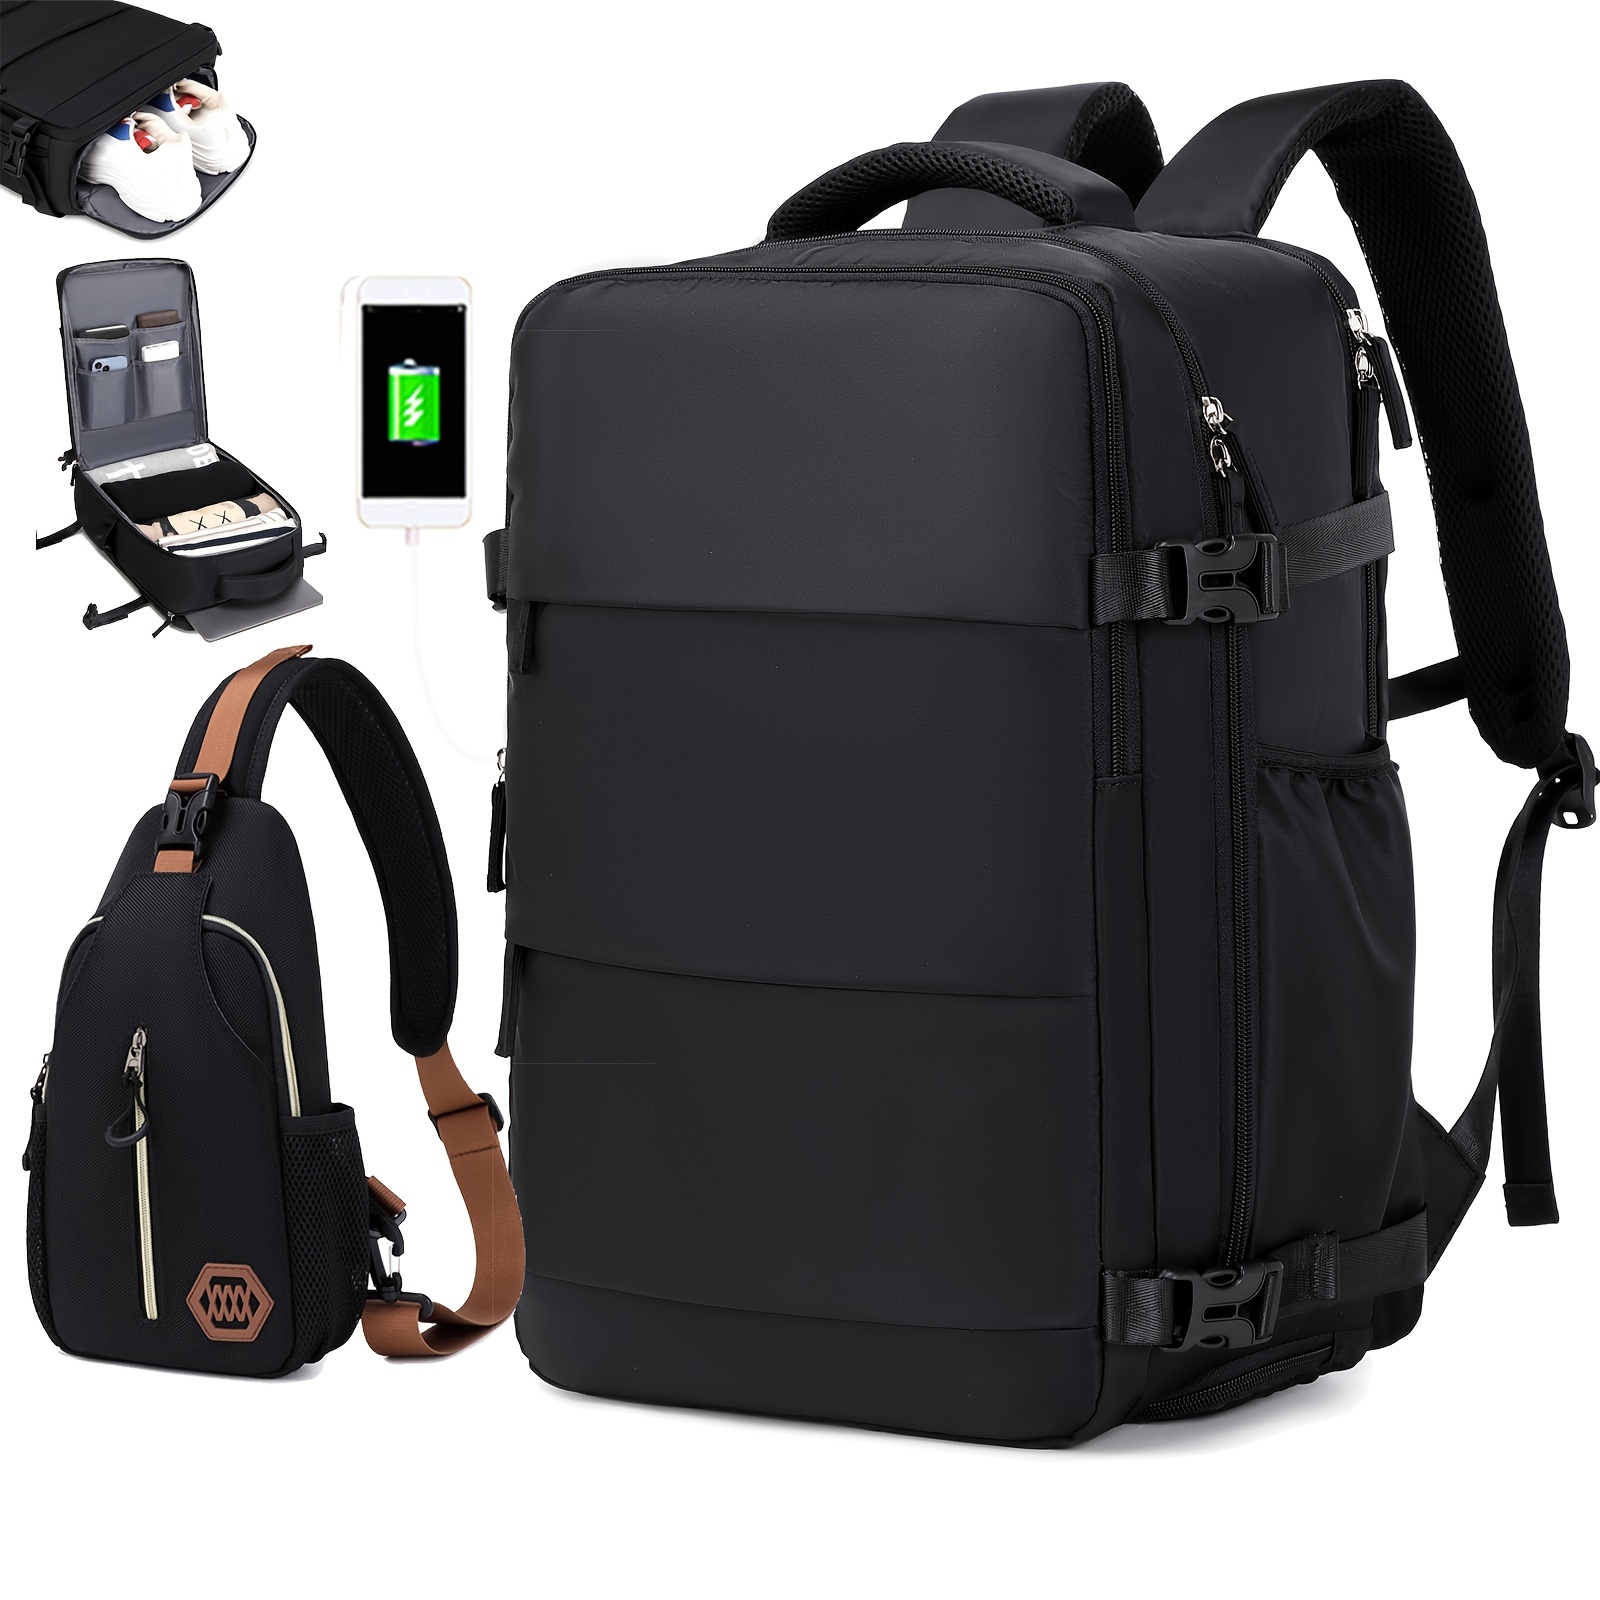 

1pc Women's Travel Backpack, Laptop Backpack, Men's Women's Casual Backpack School Bag, Outdoor Travel Bag With Shoe Compartment, Ideal Choice For Gifts, School Bags, Easter Valentines Gifts